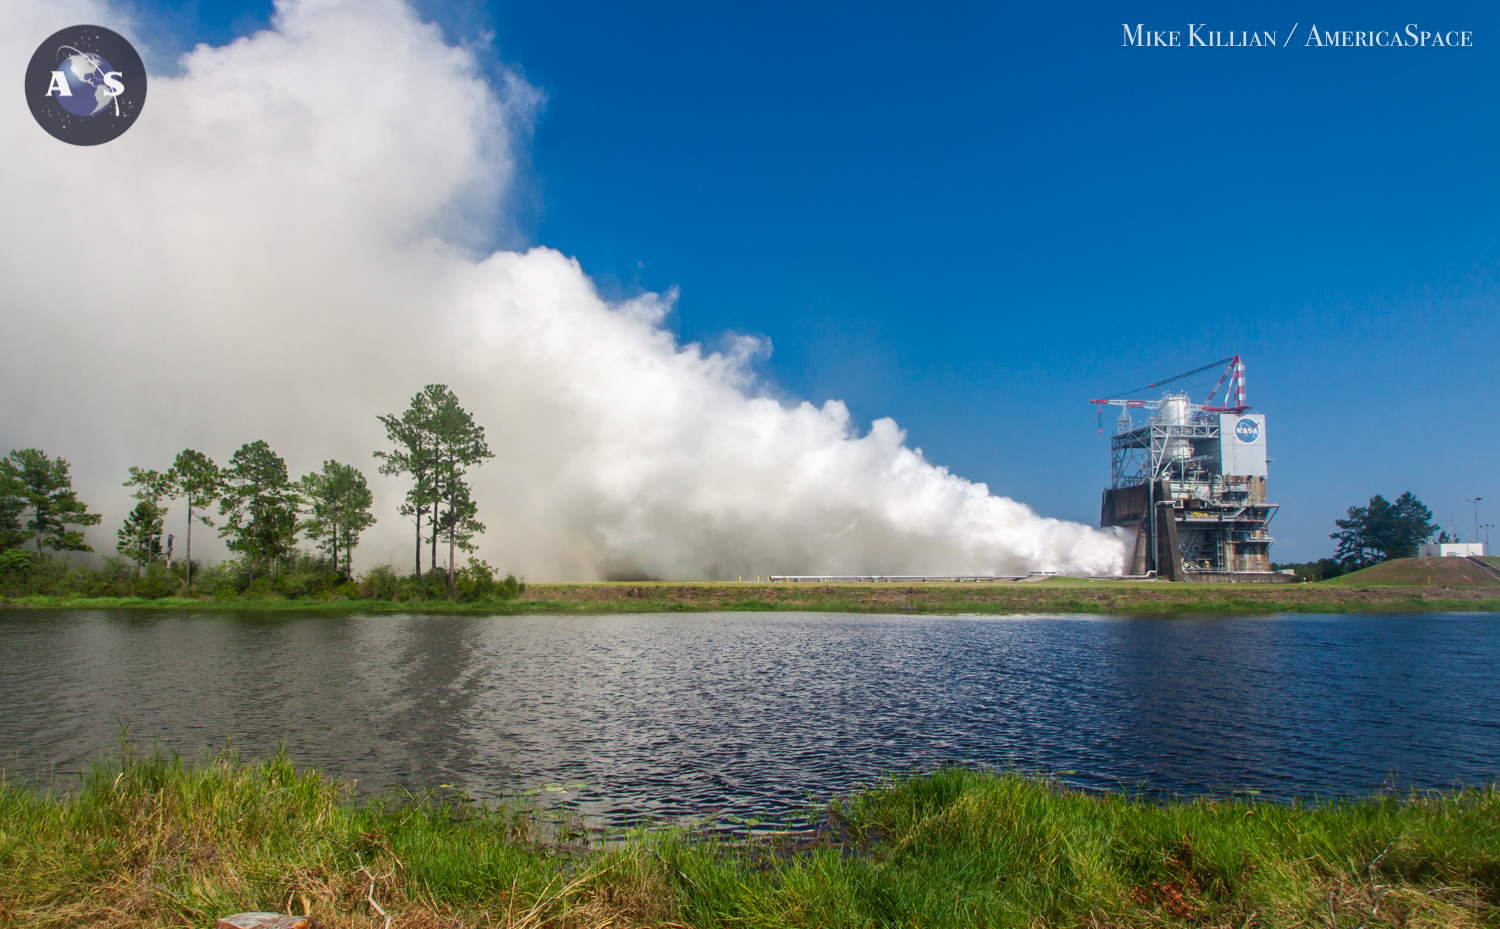 The world's most efficient rocket engine came to life again today, unleashing 512,000 pounds of thrust and a thunderous roar across southern Mississippi and NASA's Stennis Space Center during a 535-second full power test fire. The same engine that powered the space shuttle so reliably for years, the RS-25, will again be employed for NASA's Space Launch System, upgraded to meet the new requirements for what will become the most powerful rocket in history. Photo Credit: Mike Killian / AmericaSpace